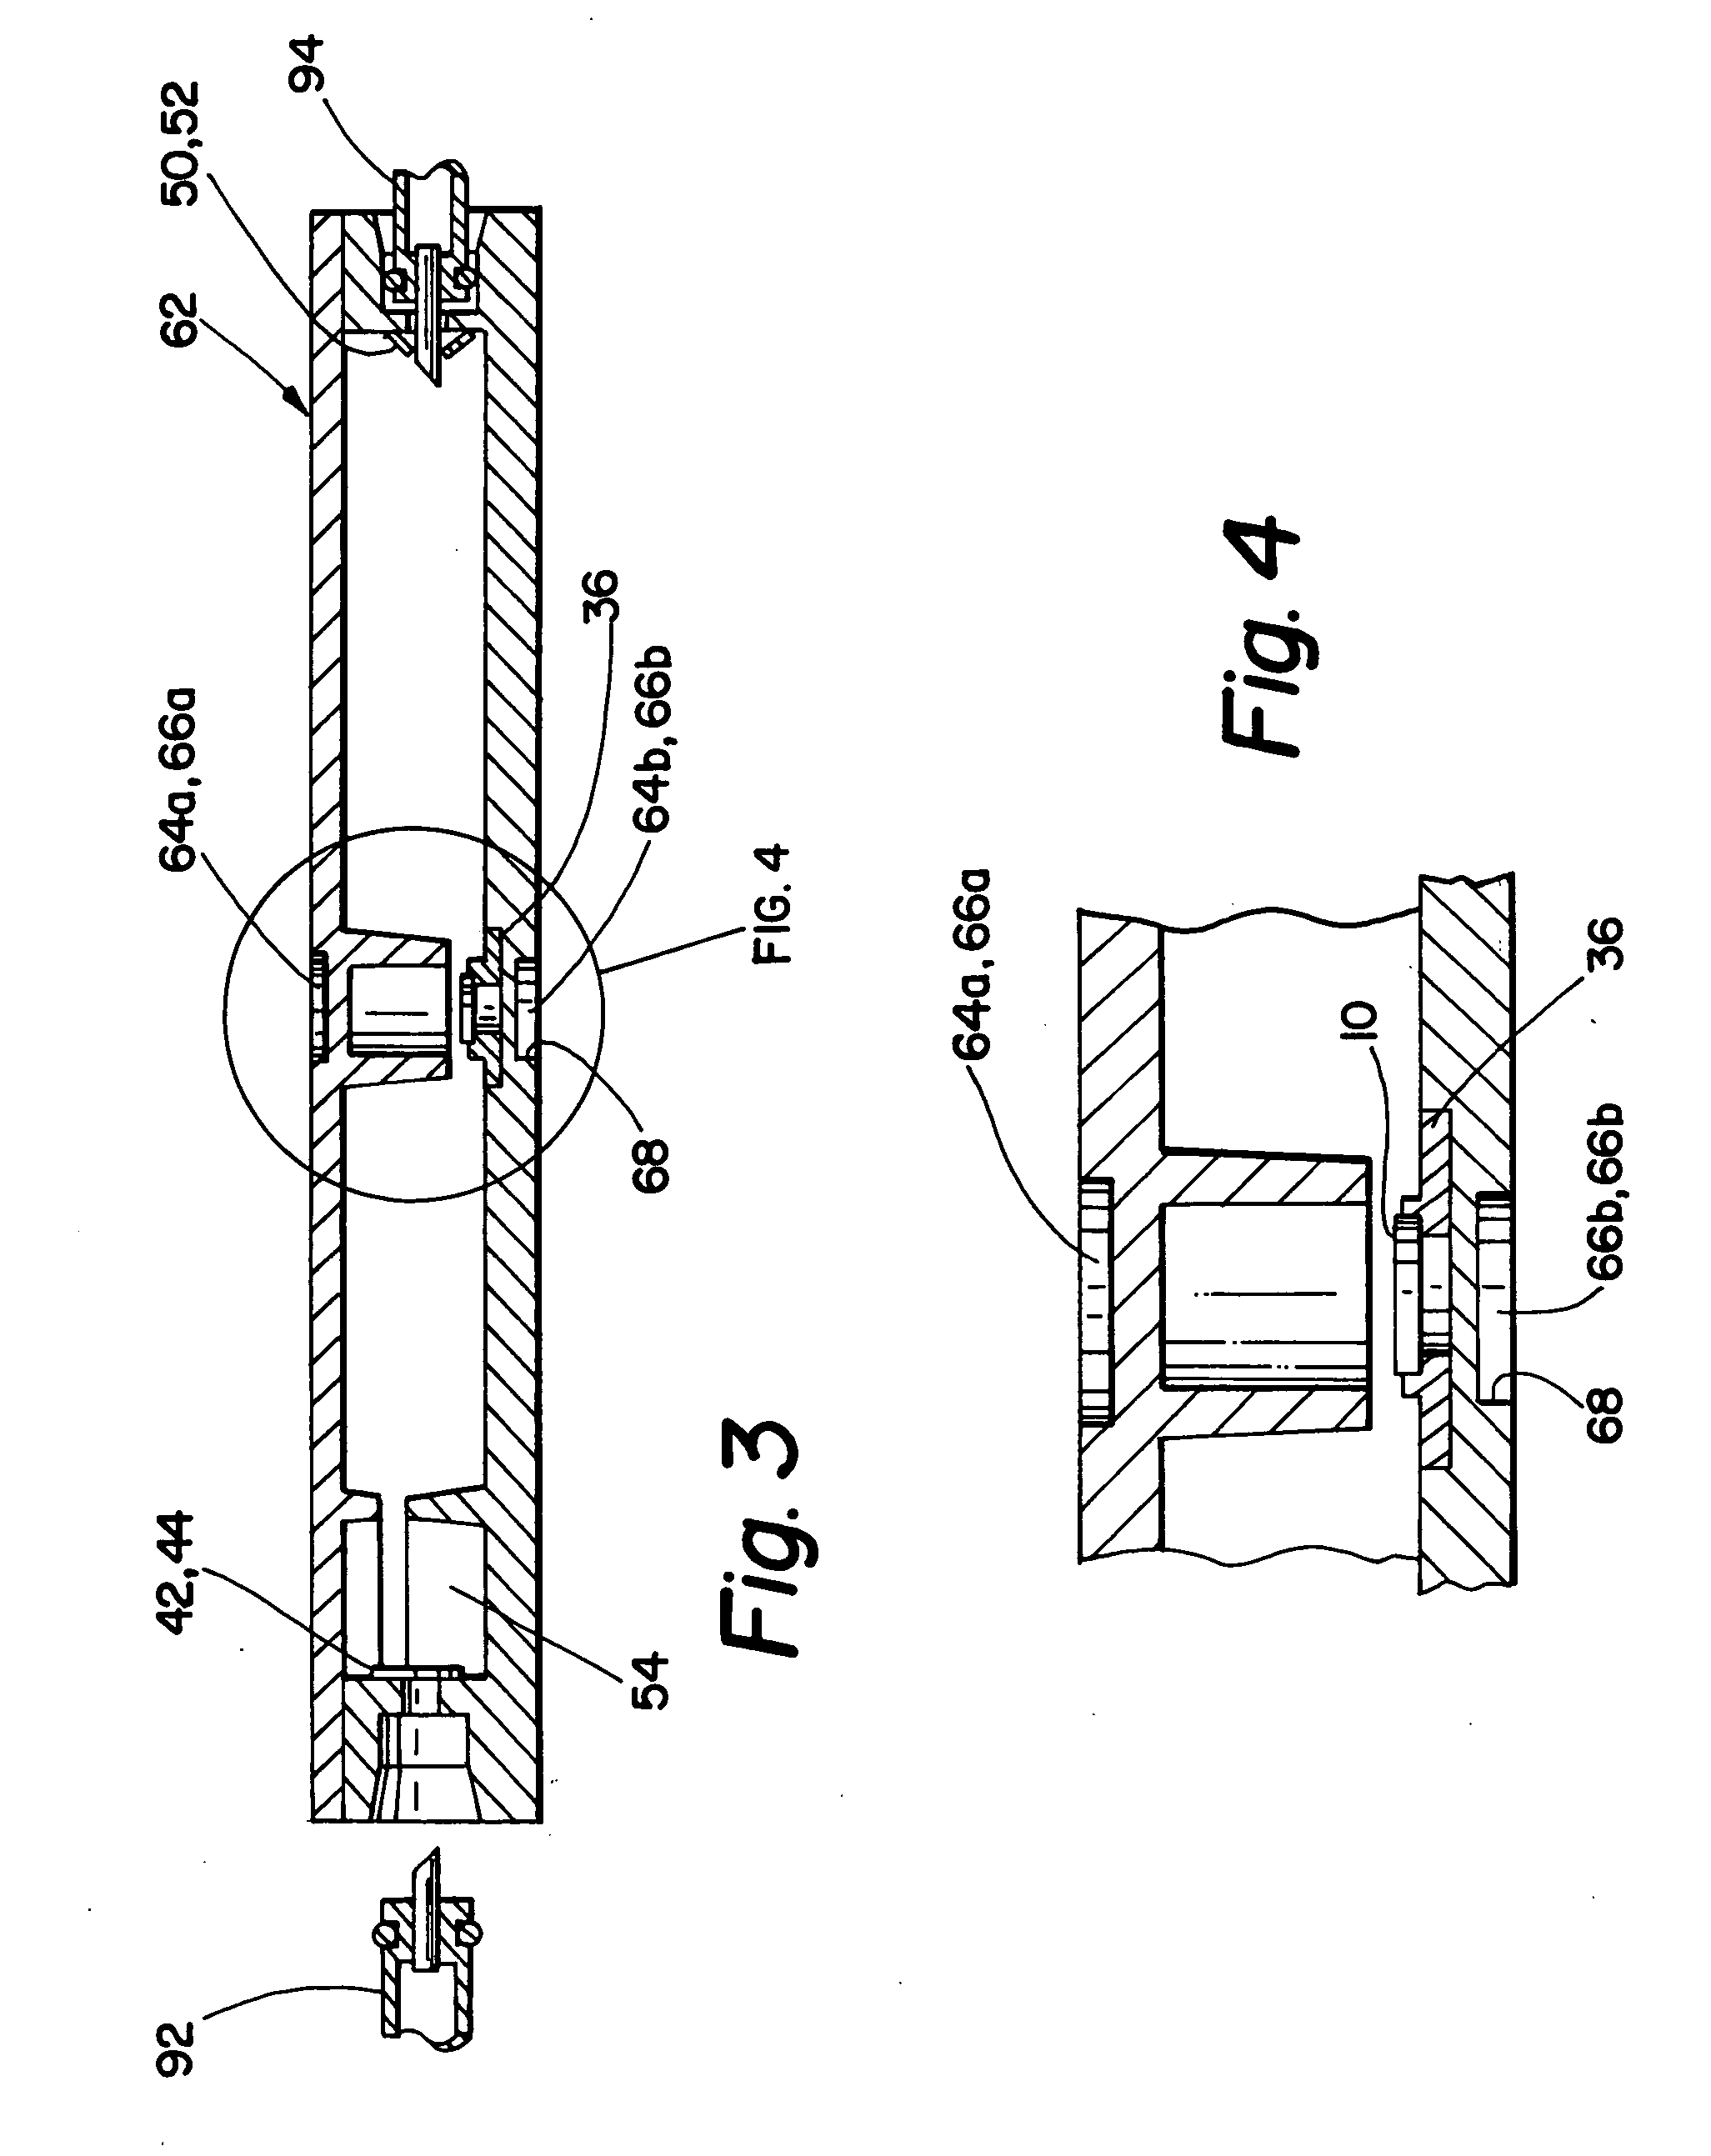 Disposable sensor for use in measuring an analyte in a gaseous sample